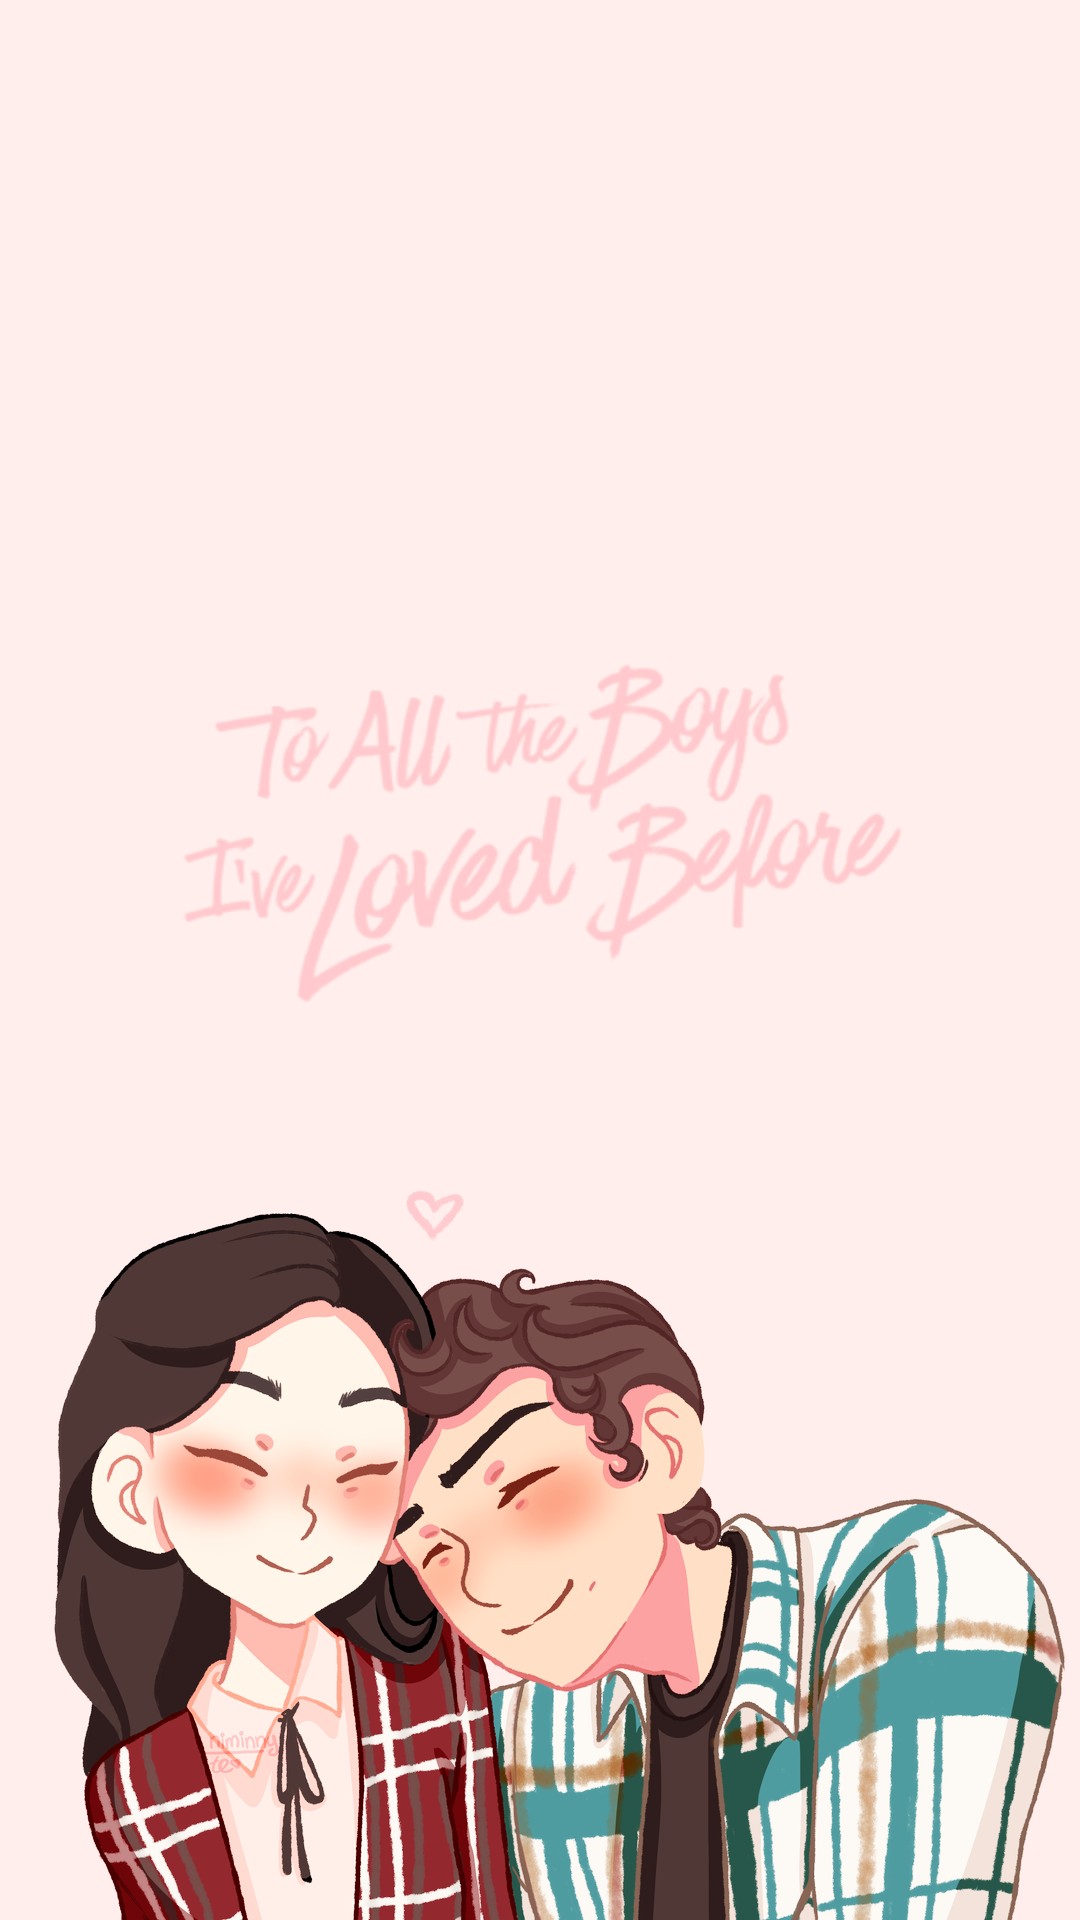 <img src="to.jpg" alt="to all the boys i've loved before"/> 